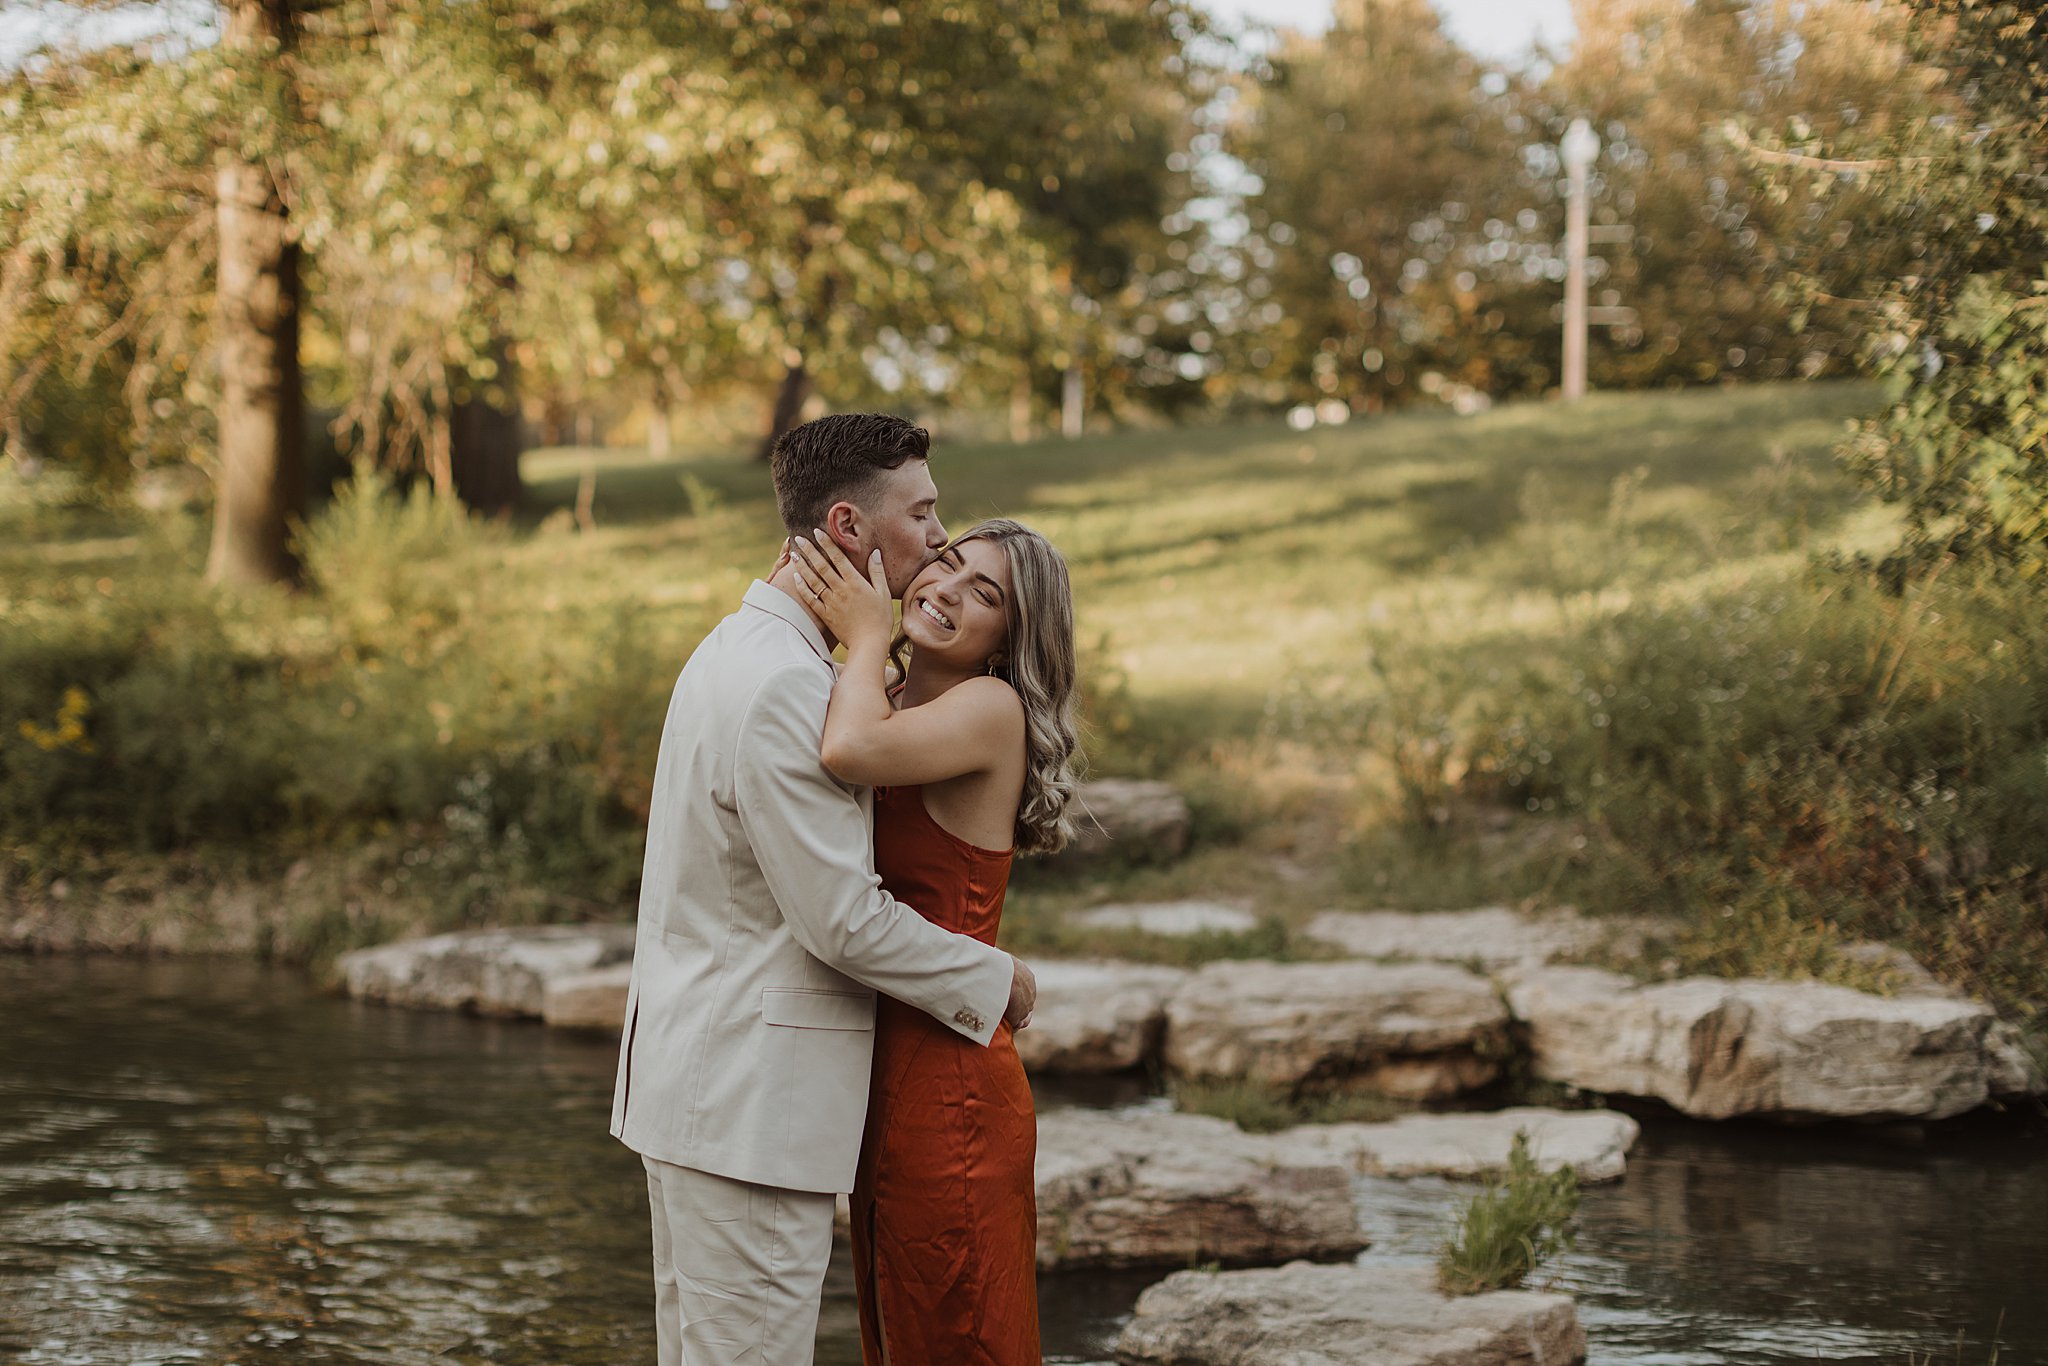 The Muny St. Louis Engagement Session